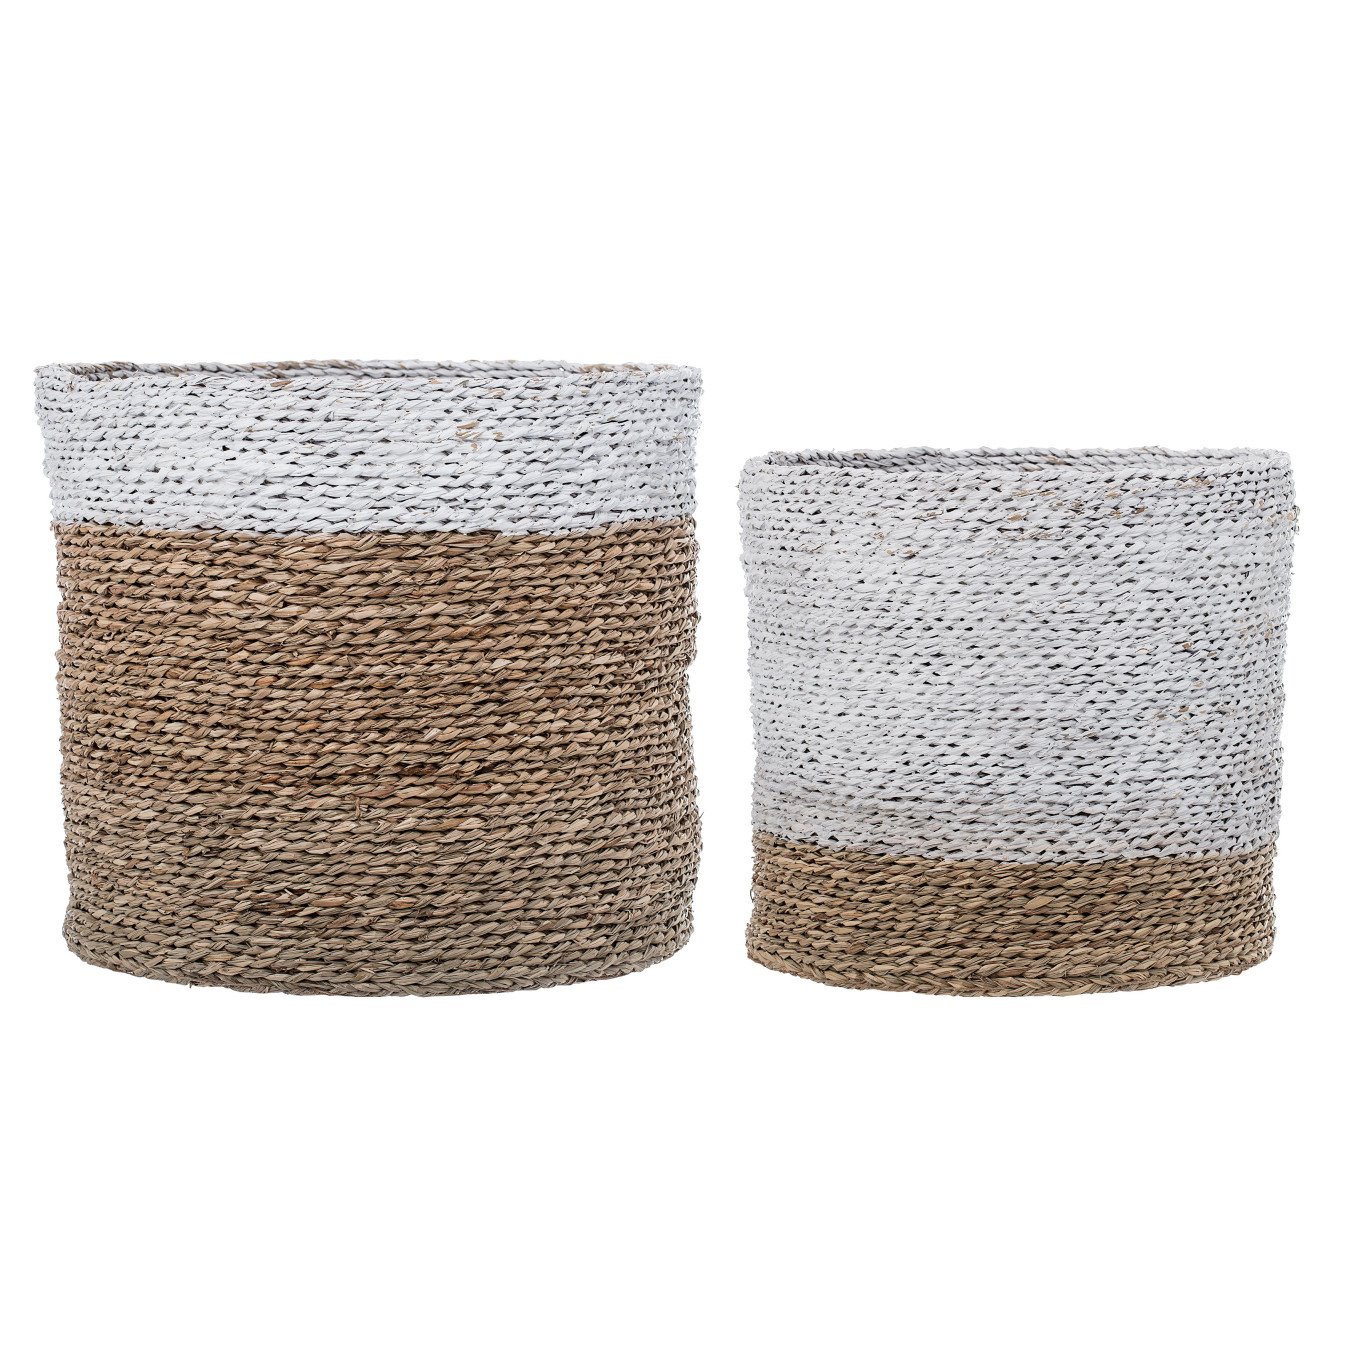 Round White & Brown Natural Seagrass Baskets (Set of 2 Sizes)